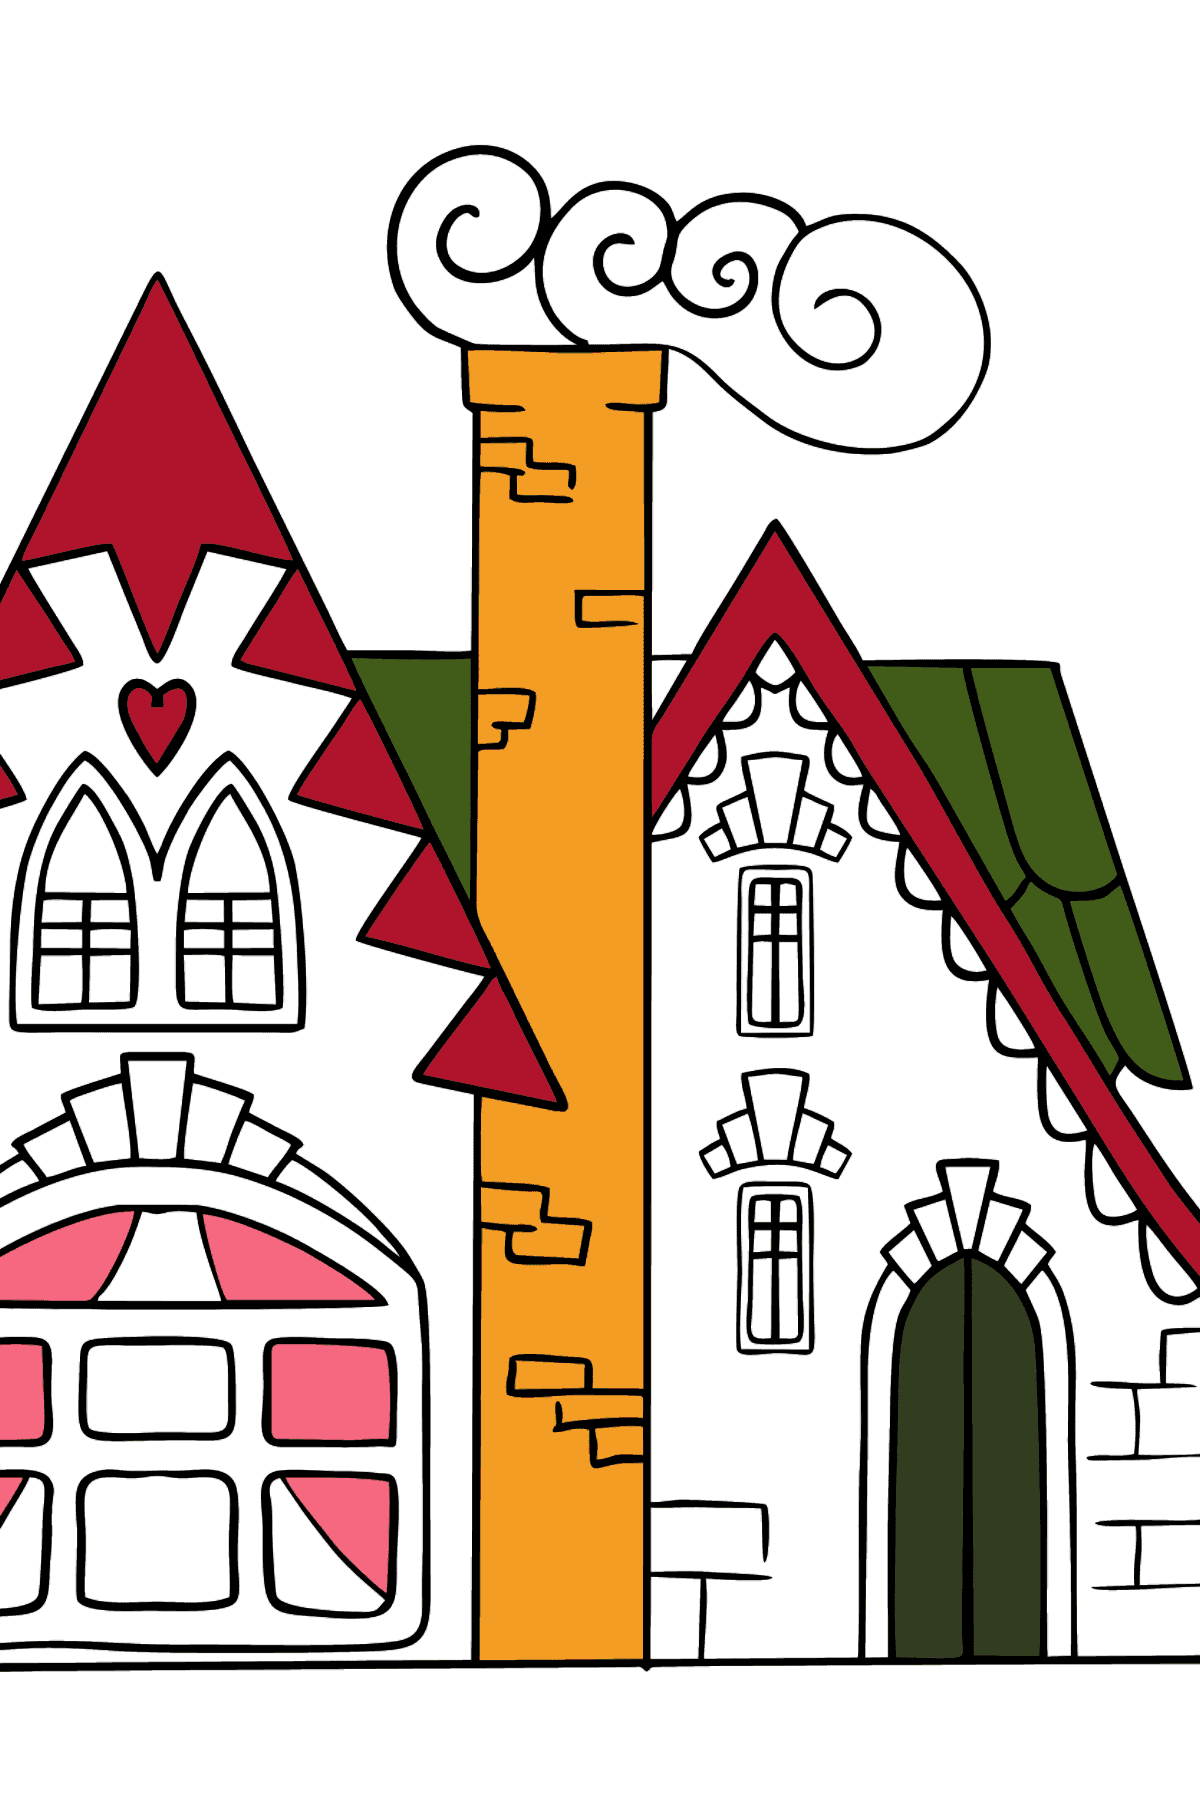 Charming House Coloring Page - Coloring Pages for Kids